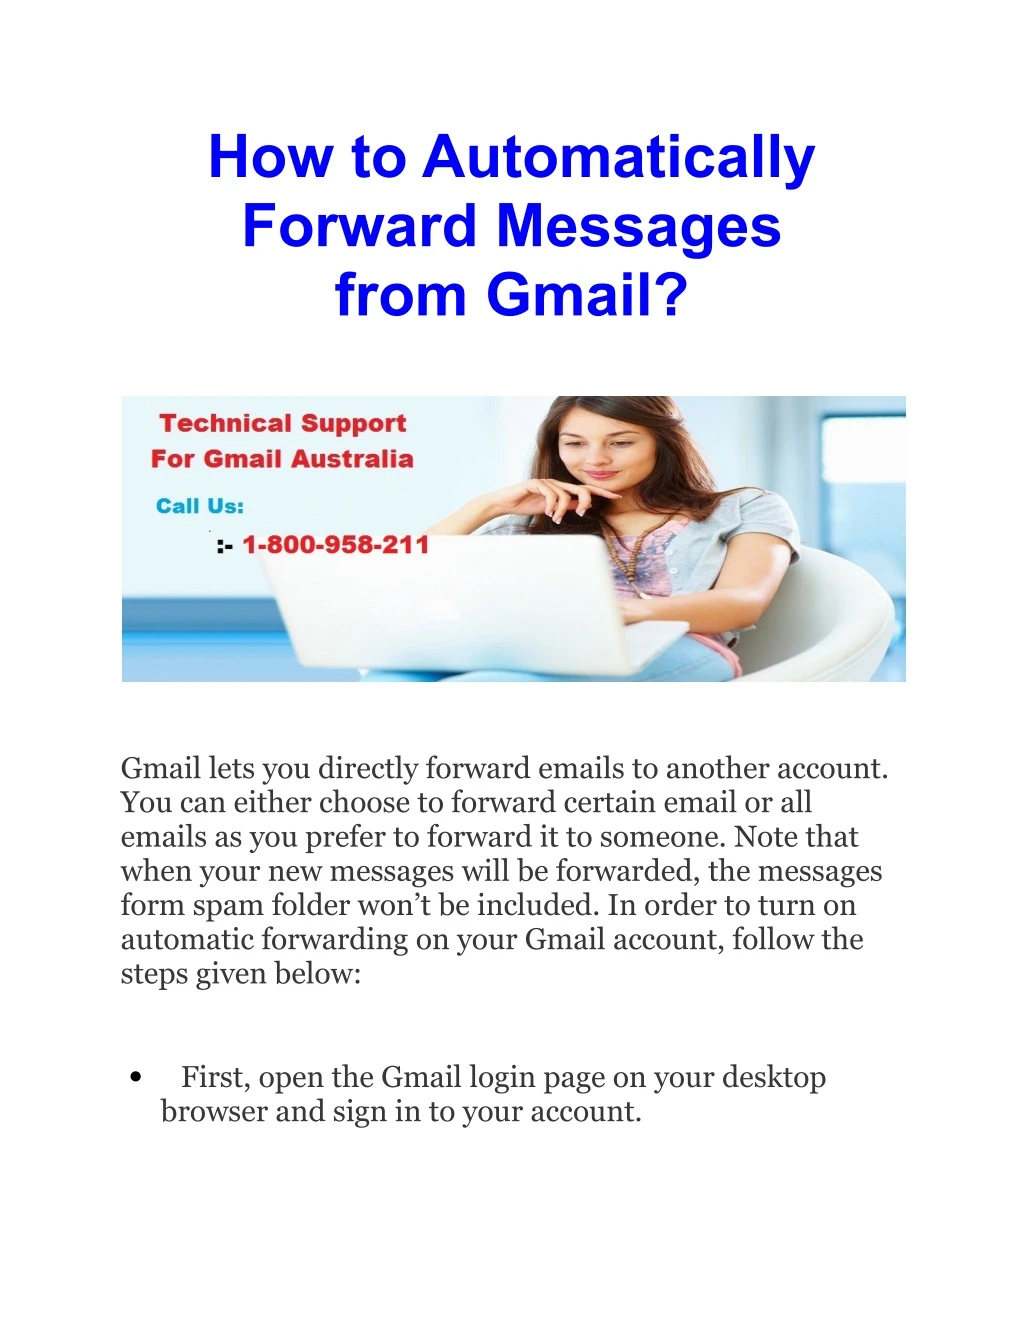 how to automatically forward messages from gmail